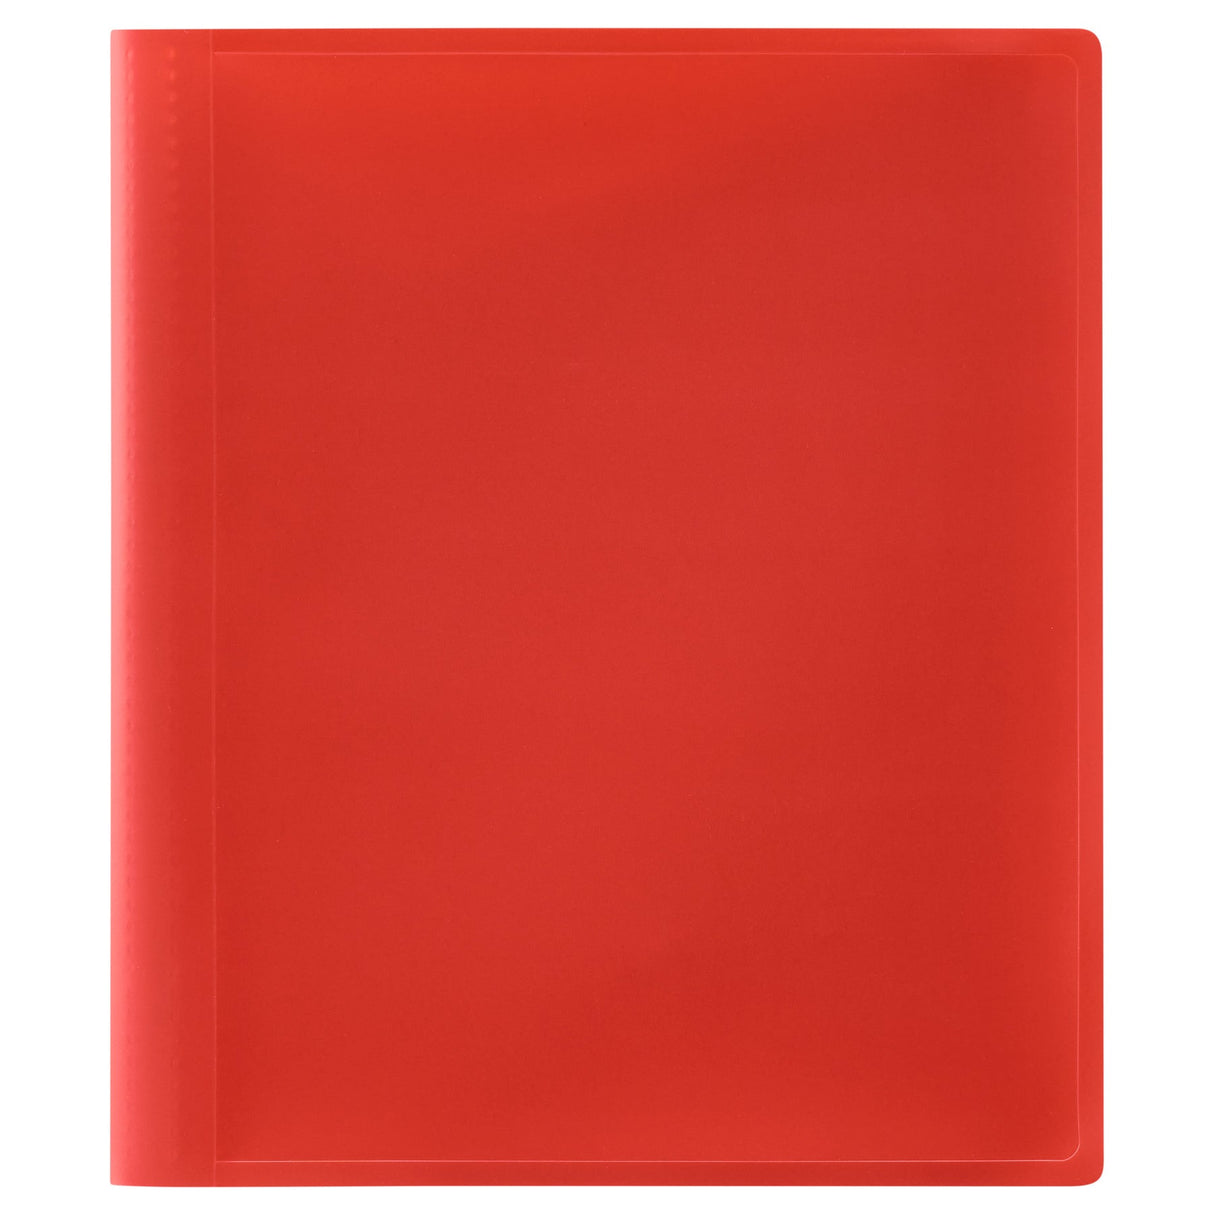 Concept A4 Display Book - Red Soft Cover - 60 Pockets | Stationery Shop UK